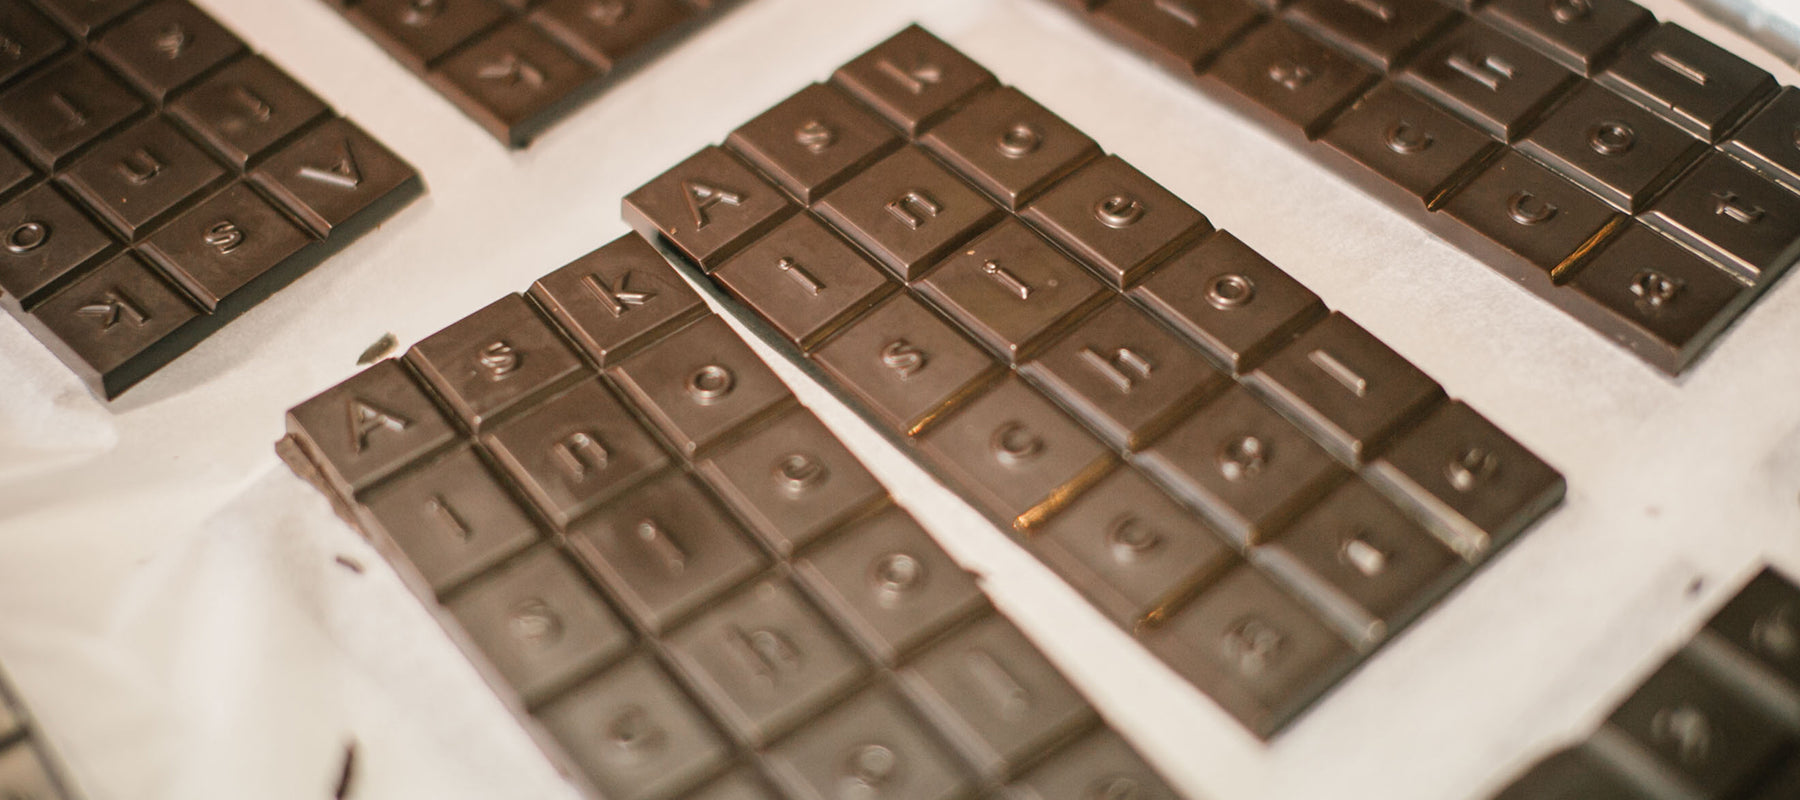 A tray of unpackaged chocolate bars lay on a white paper liner